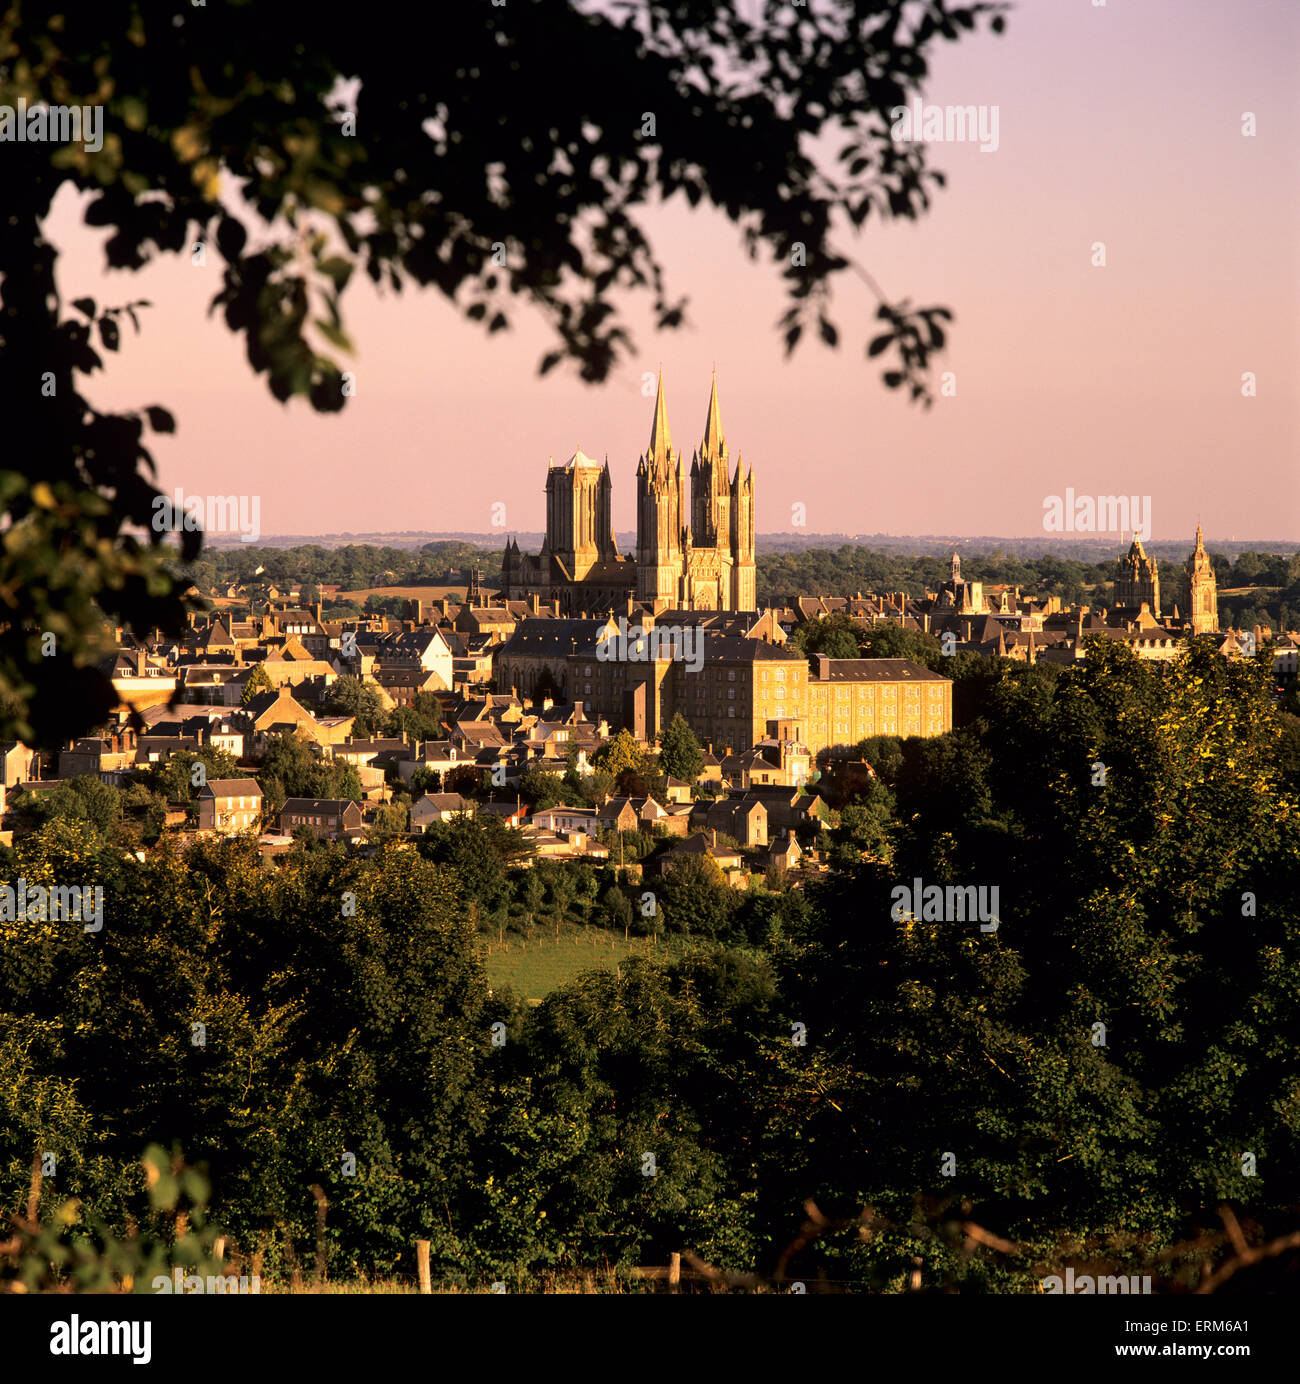 View over town and cathedral, Coutances, Normandy, France, Europe Stock Photo